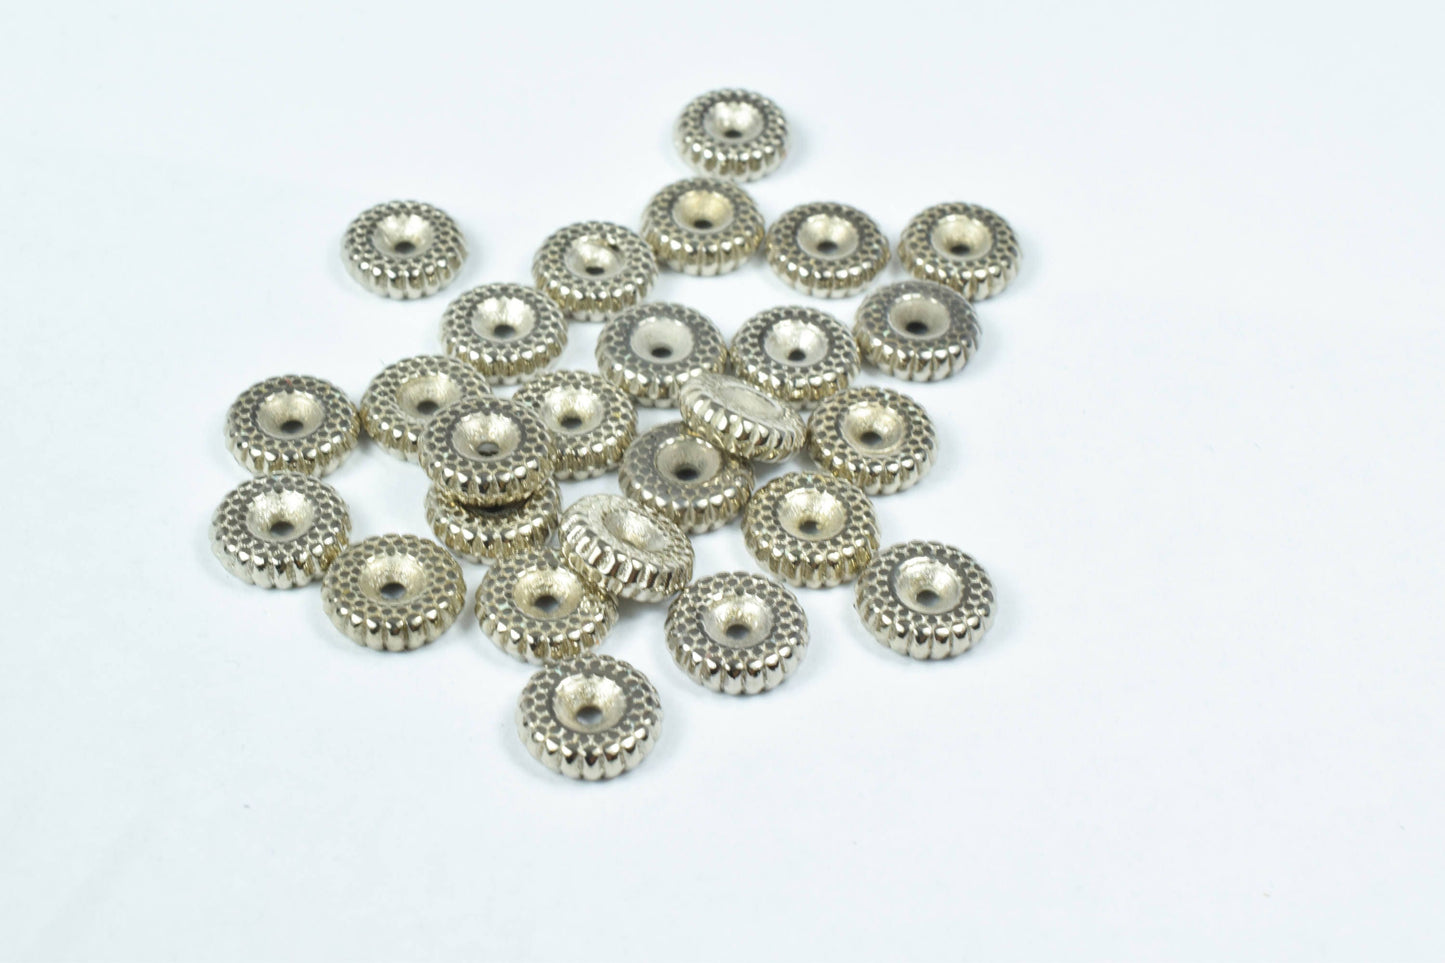 10mm Ribbed Antique Silver Plastic Round Beads, Plastic Beading Tools, Resin Antique Silver Plastic Beads, Macrame Beads,Beads, DIY